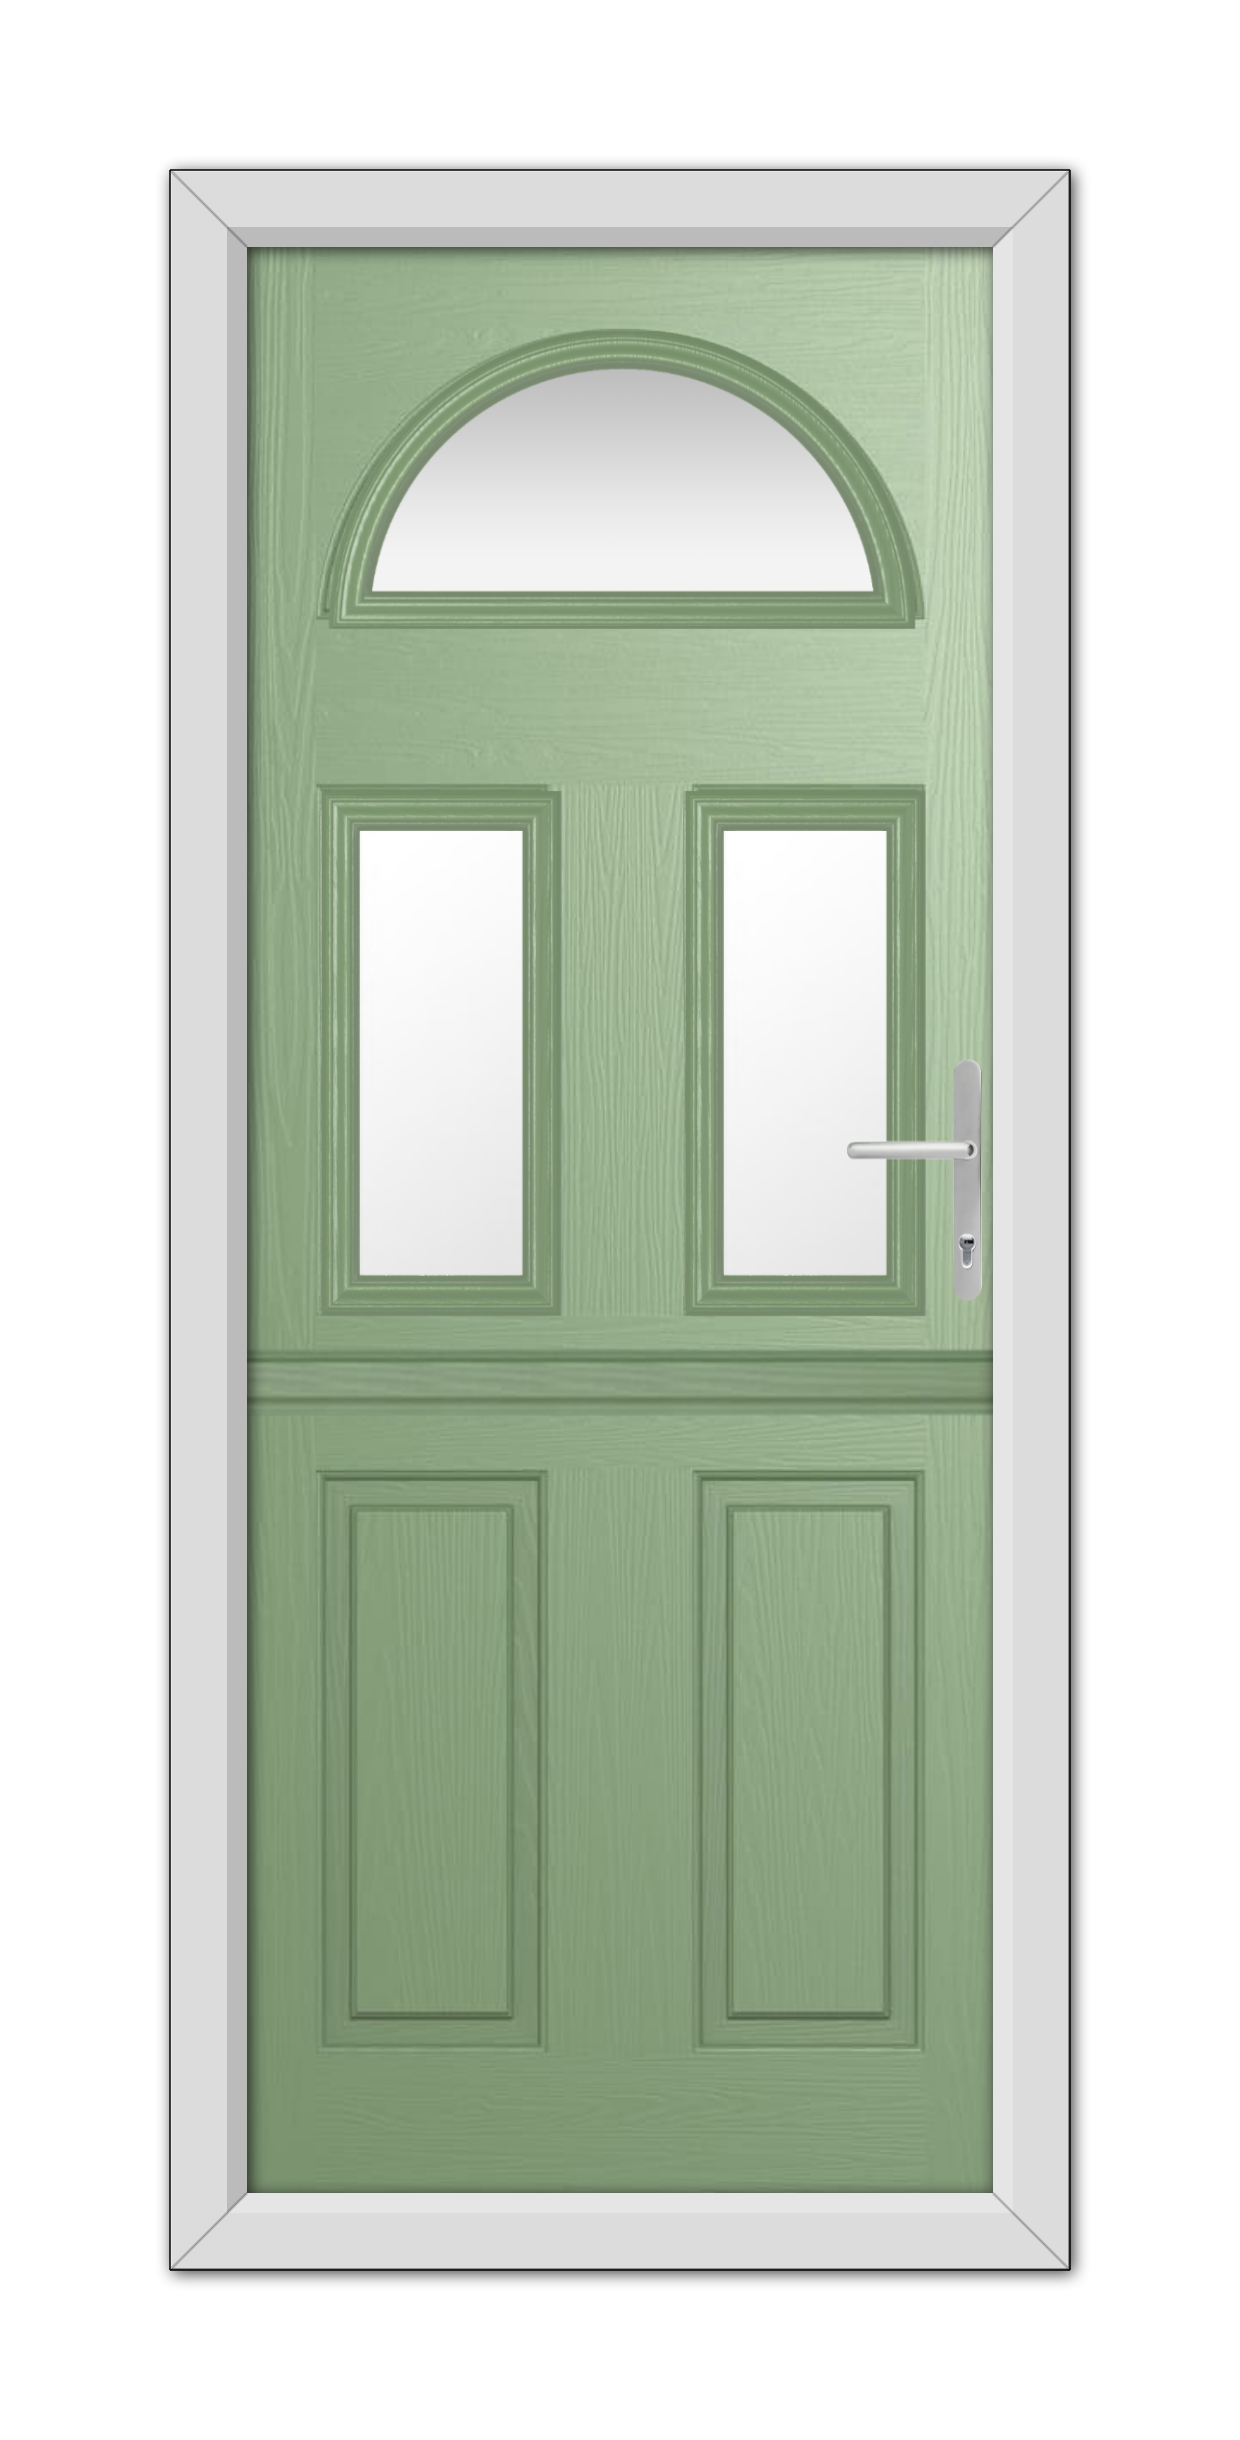 Chartwell Green Winslow 3 Stable Composite Door 48mm Timber Core with an arched window at the top and two square windows set into the upper half, fitted in a white frame.